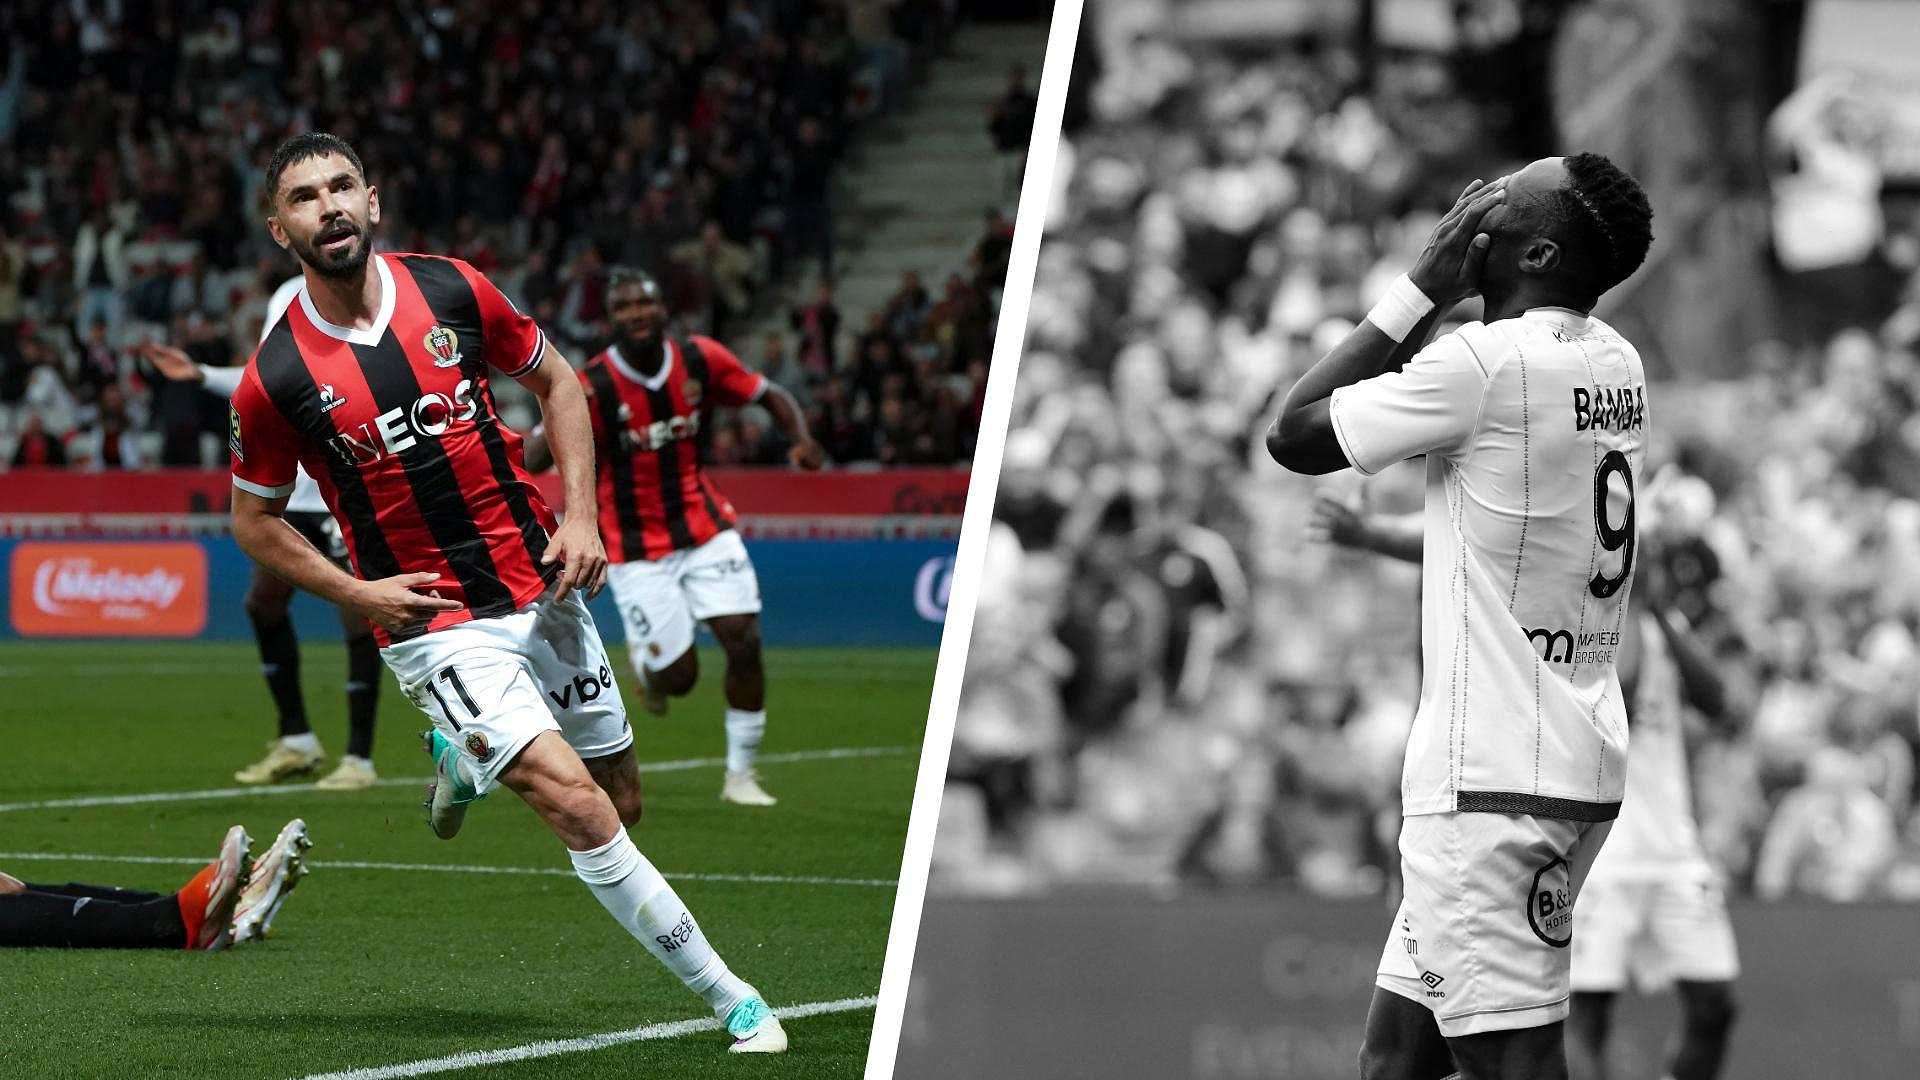 Nice-Lorient: Sanson as a maestro, Bamba catastrophic... The tops and the flops